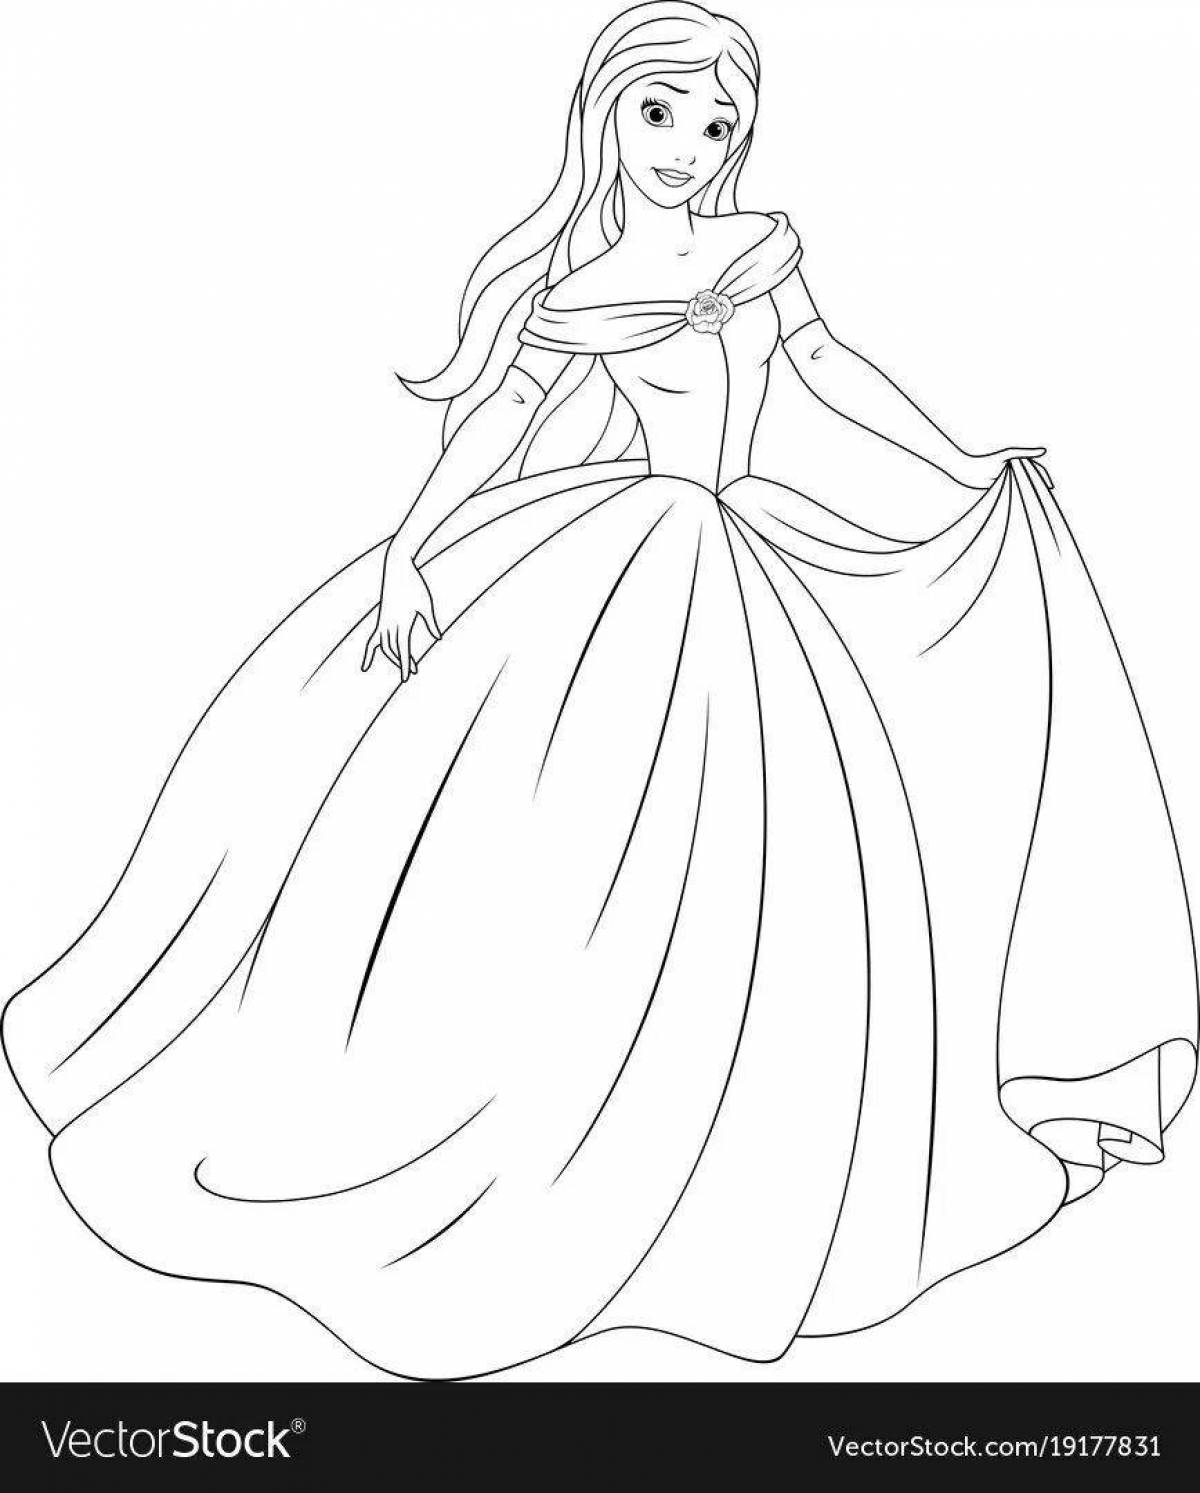 Flawless coloring of barbie in a big dress